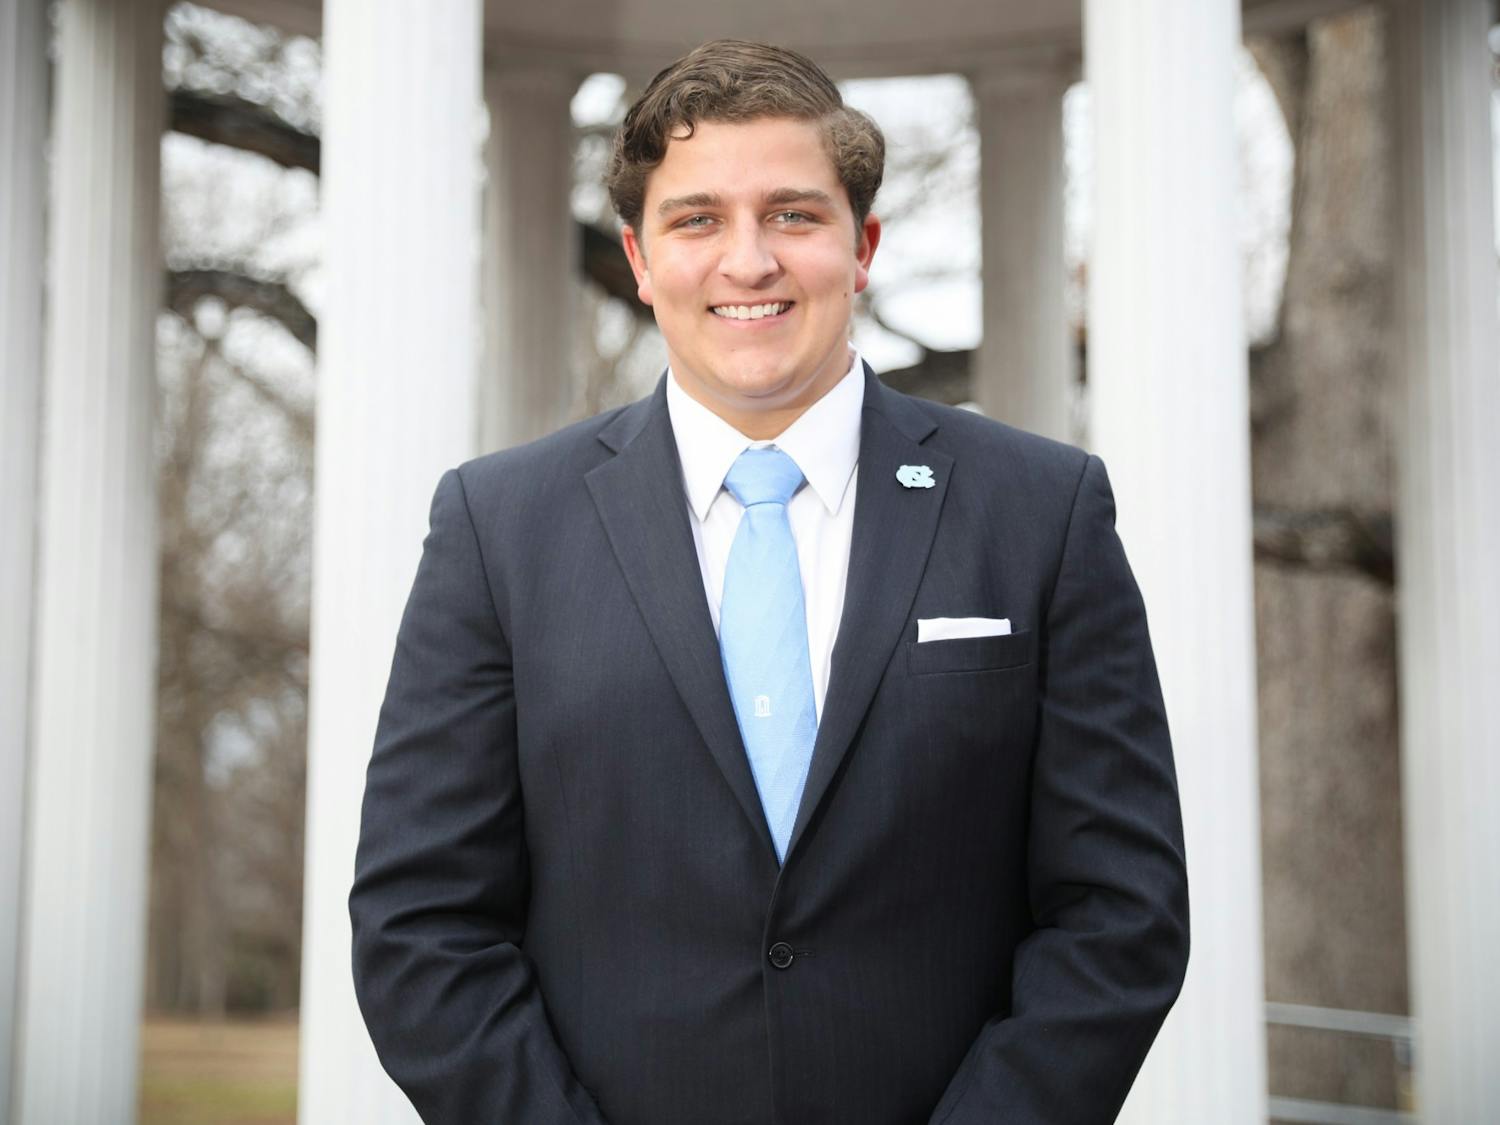 Sam Robinson, a candidate for student body president, stands in front of the Old Well on Thursday, Feb. 3, 2022.  